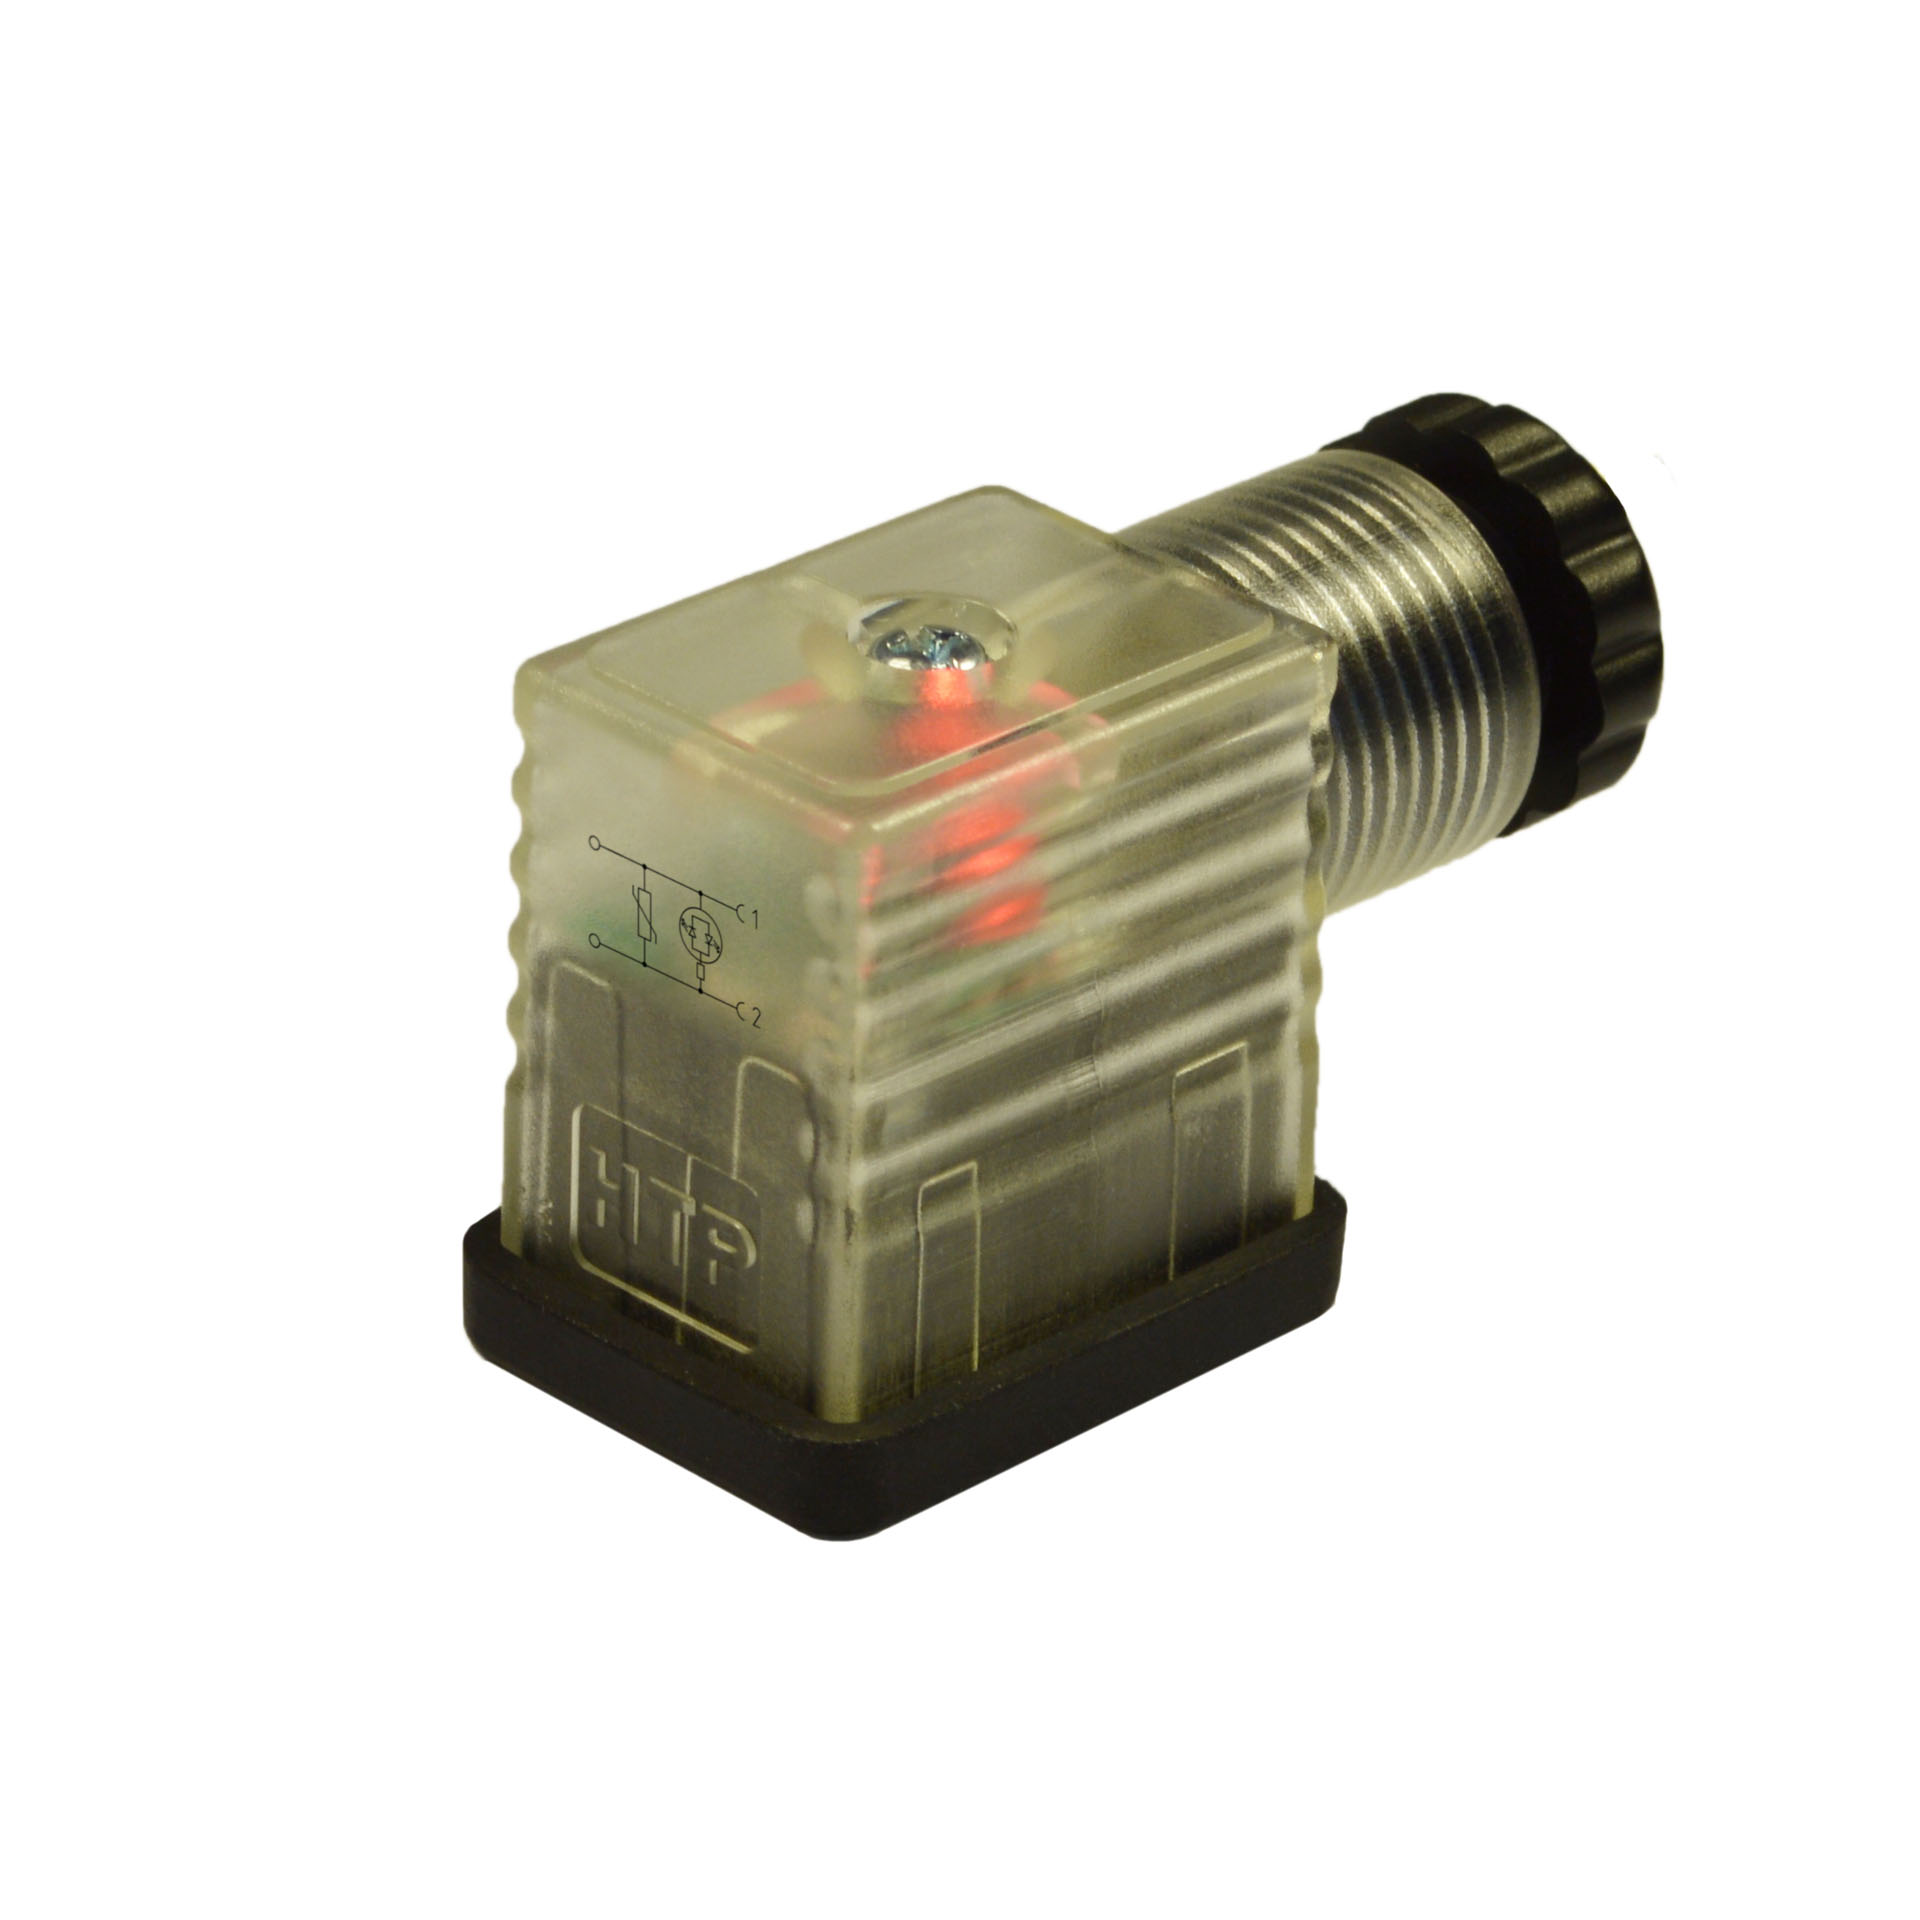 Industrial standard(typeB)field attachable,2p+PE(h.12),red LED+vdr,230VAC/DC,PG9